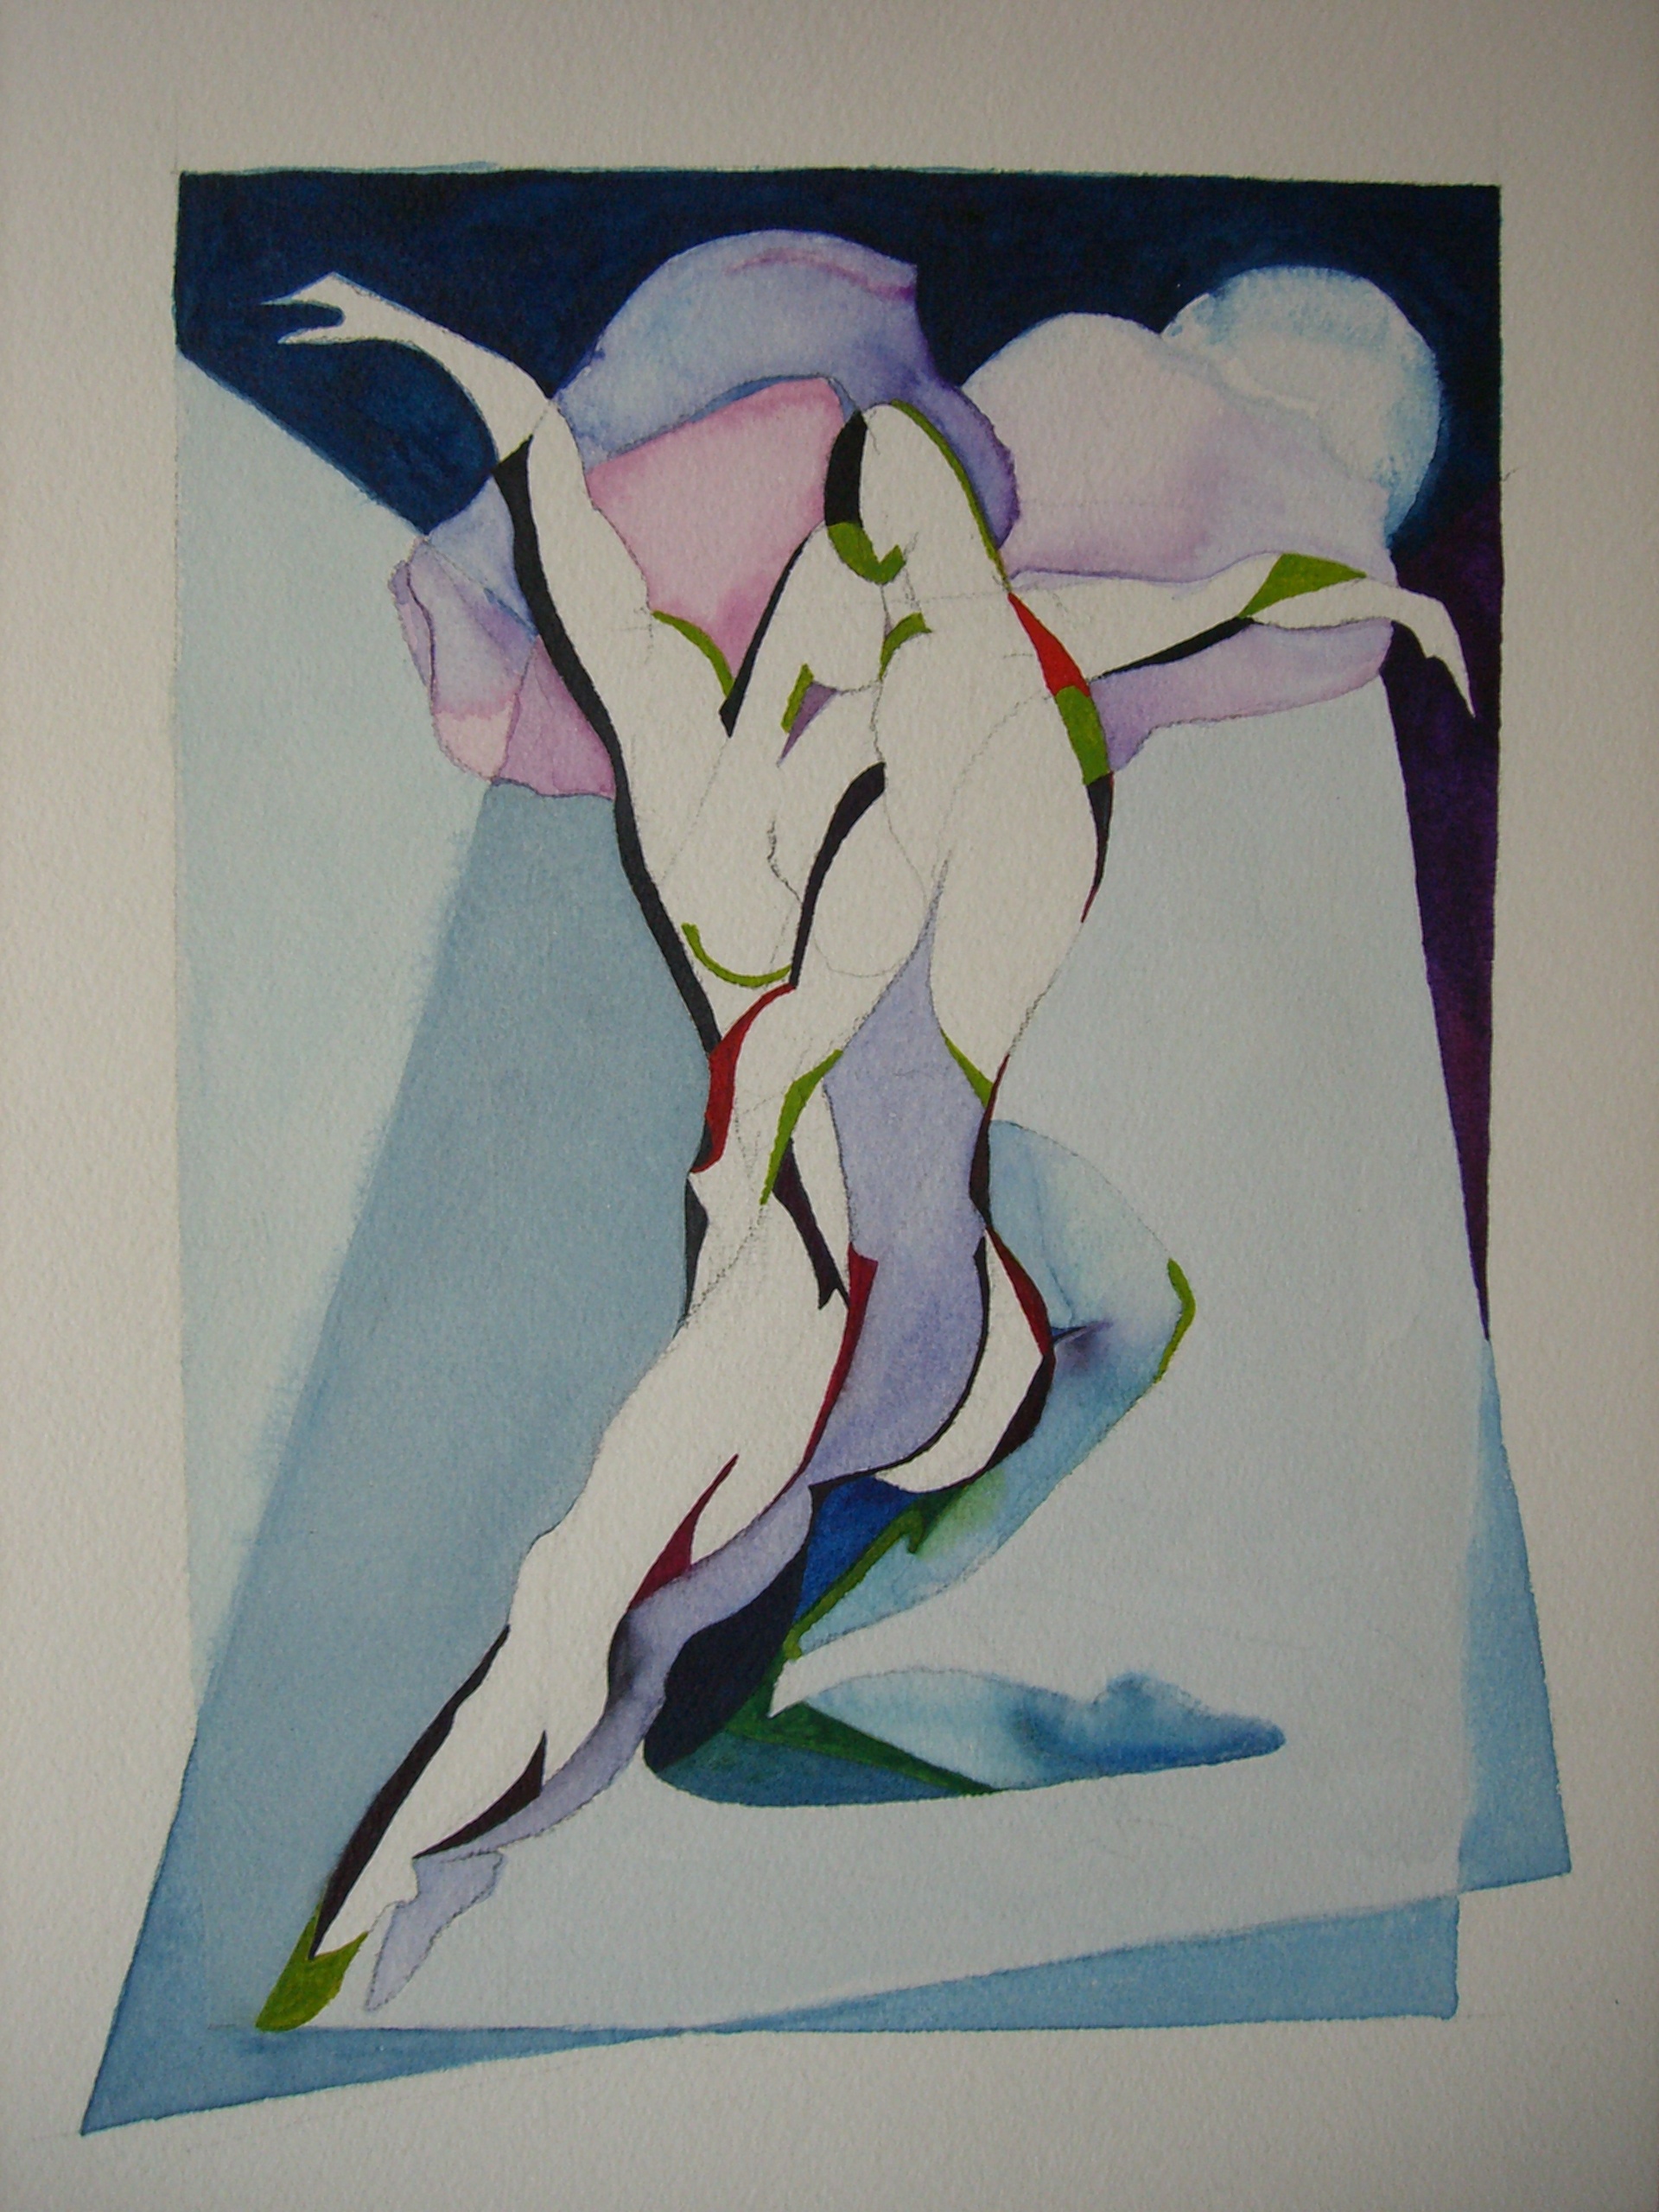 Wishful Fantacy, 14'x 20". watercolor, sold at the National Museum for Women in the Arts auction 2006